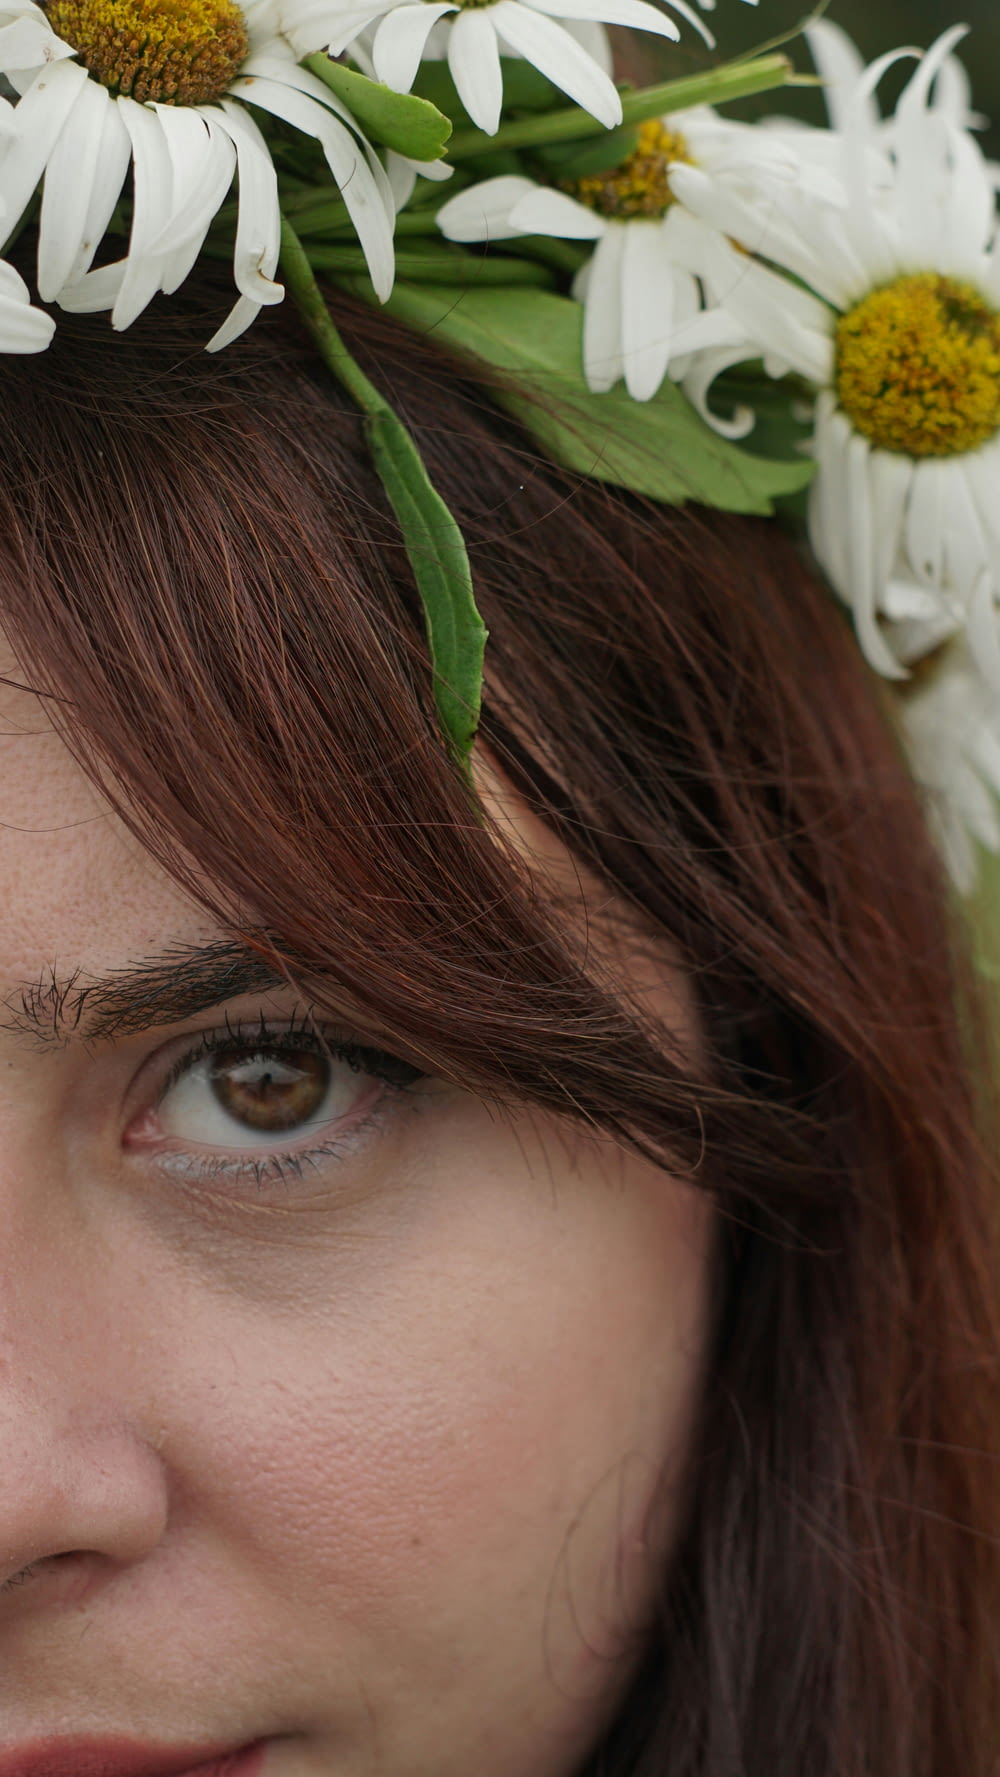 a woman with a flower crown on her head